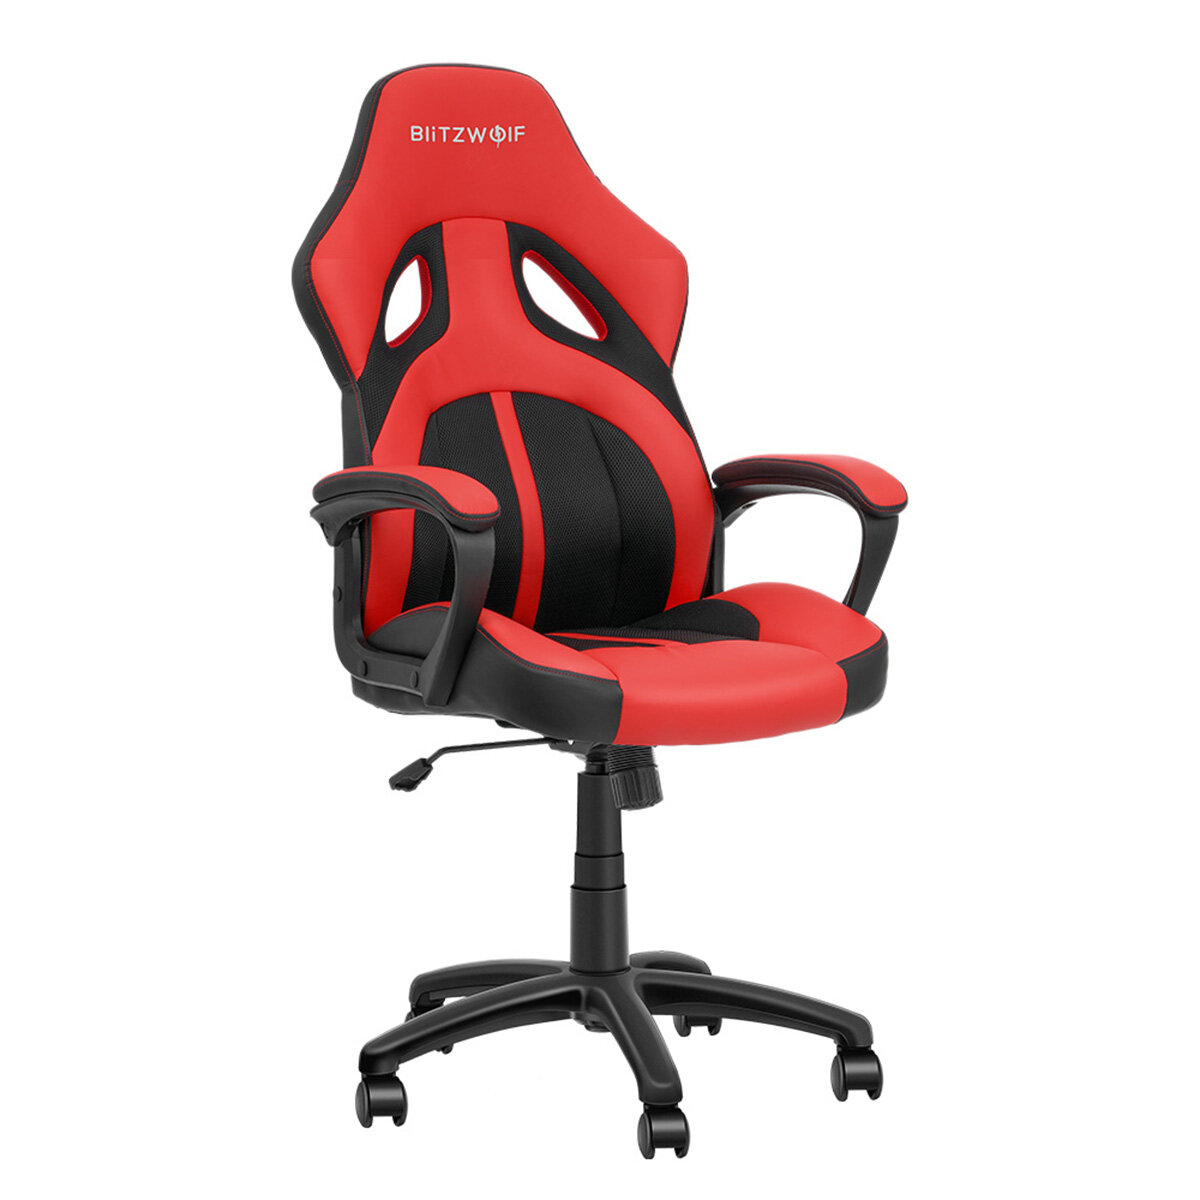 BlitzWolfÂ® BW-GC3 Racing Style Gaming Chair PU + Mesh Material Streamlined Design Adjustable Height Widened Seat Home Office